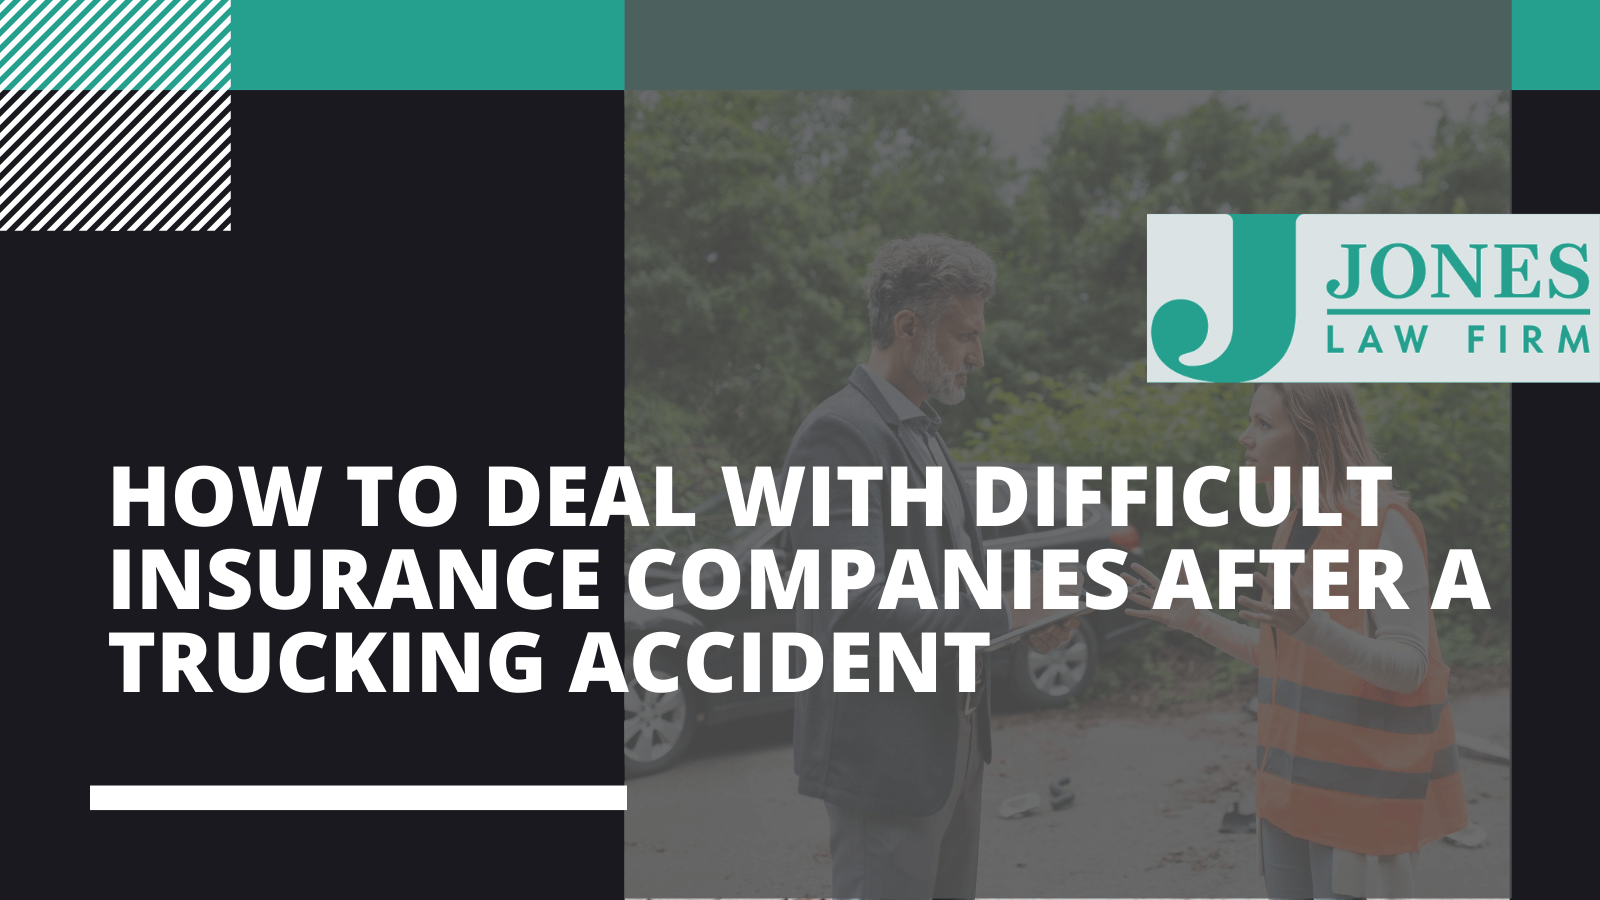 How to Deal With Difficult Insurance Companies After a Trucking Accident - Jones law firm - Alexandria louisiana